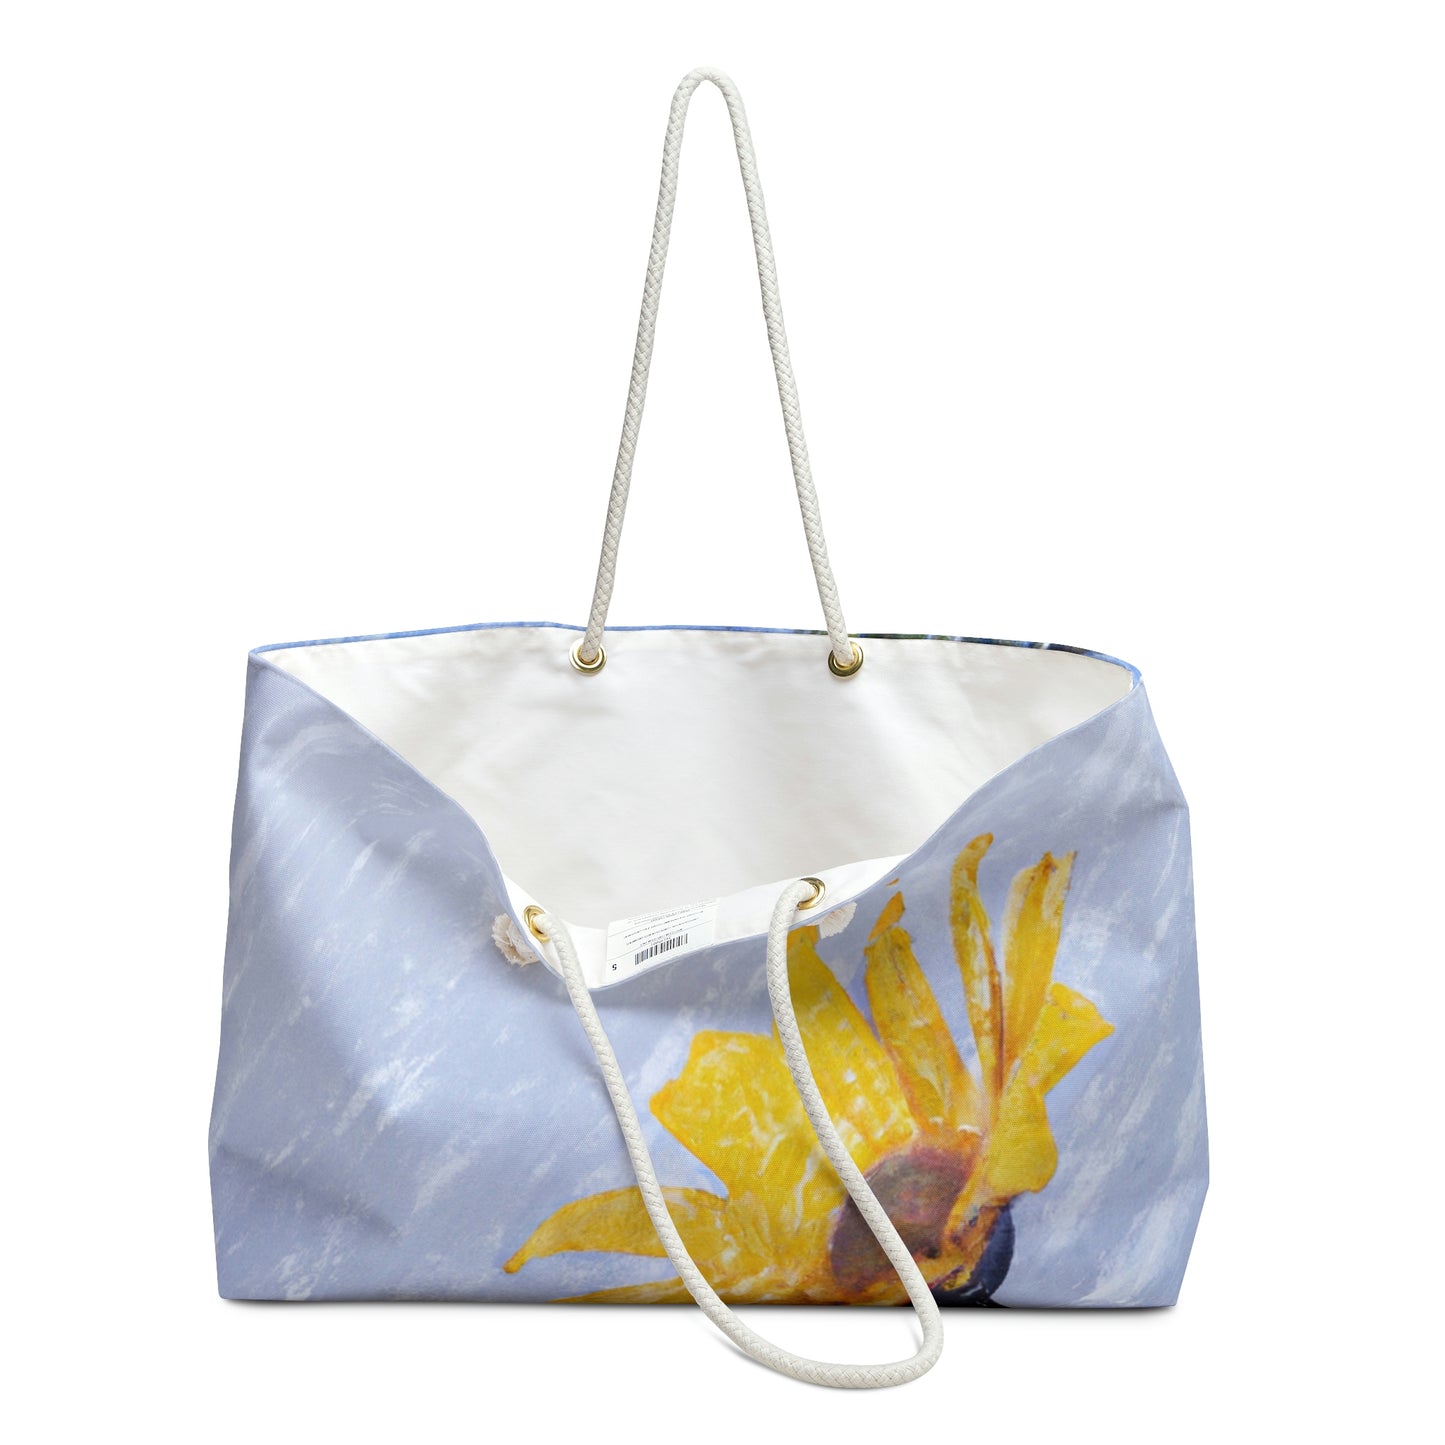 "A Burst of Color in the Glistening White: The Miracle of a Flower Blooms in a Snowstorm" - The Alien Weekender Bag